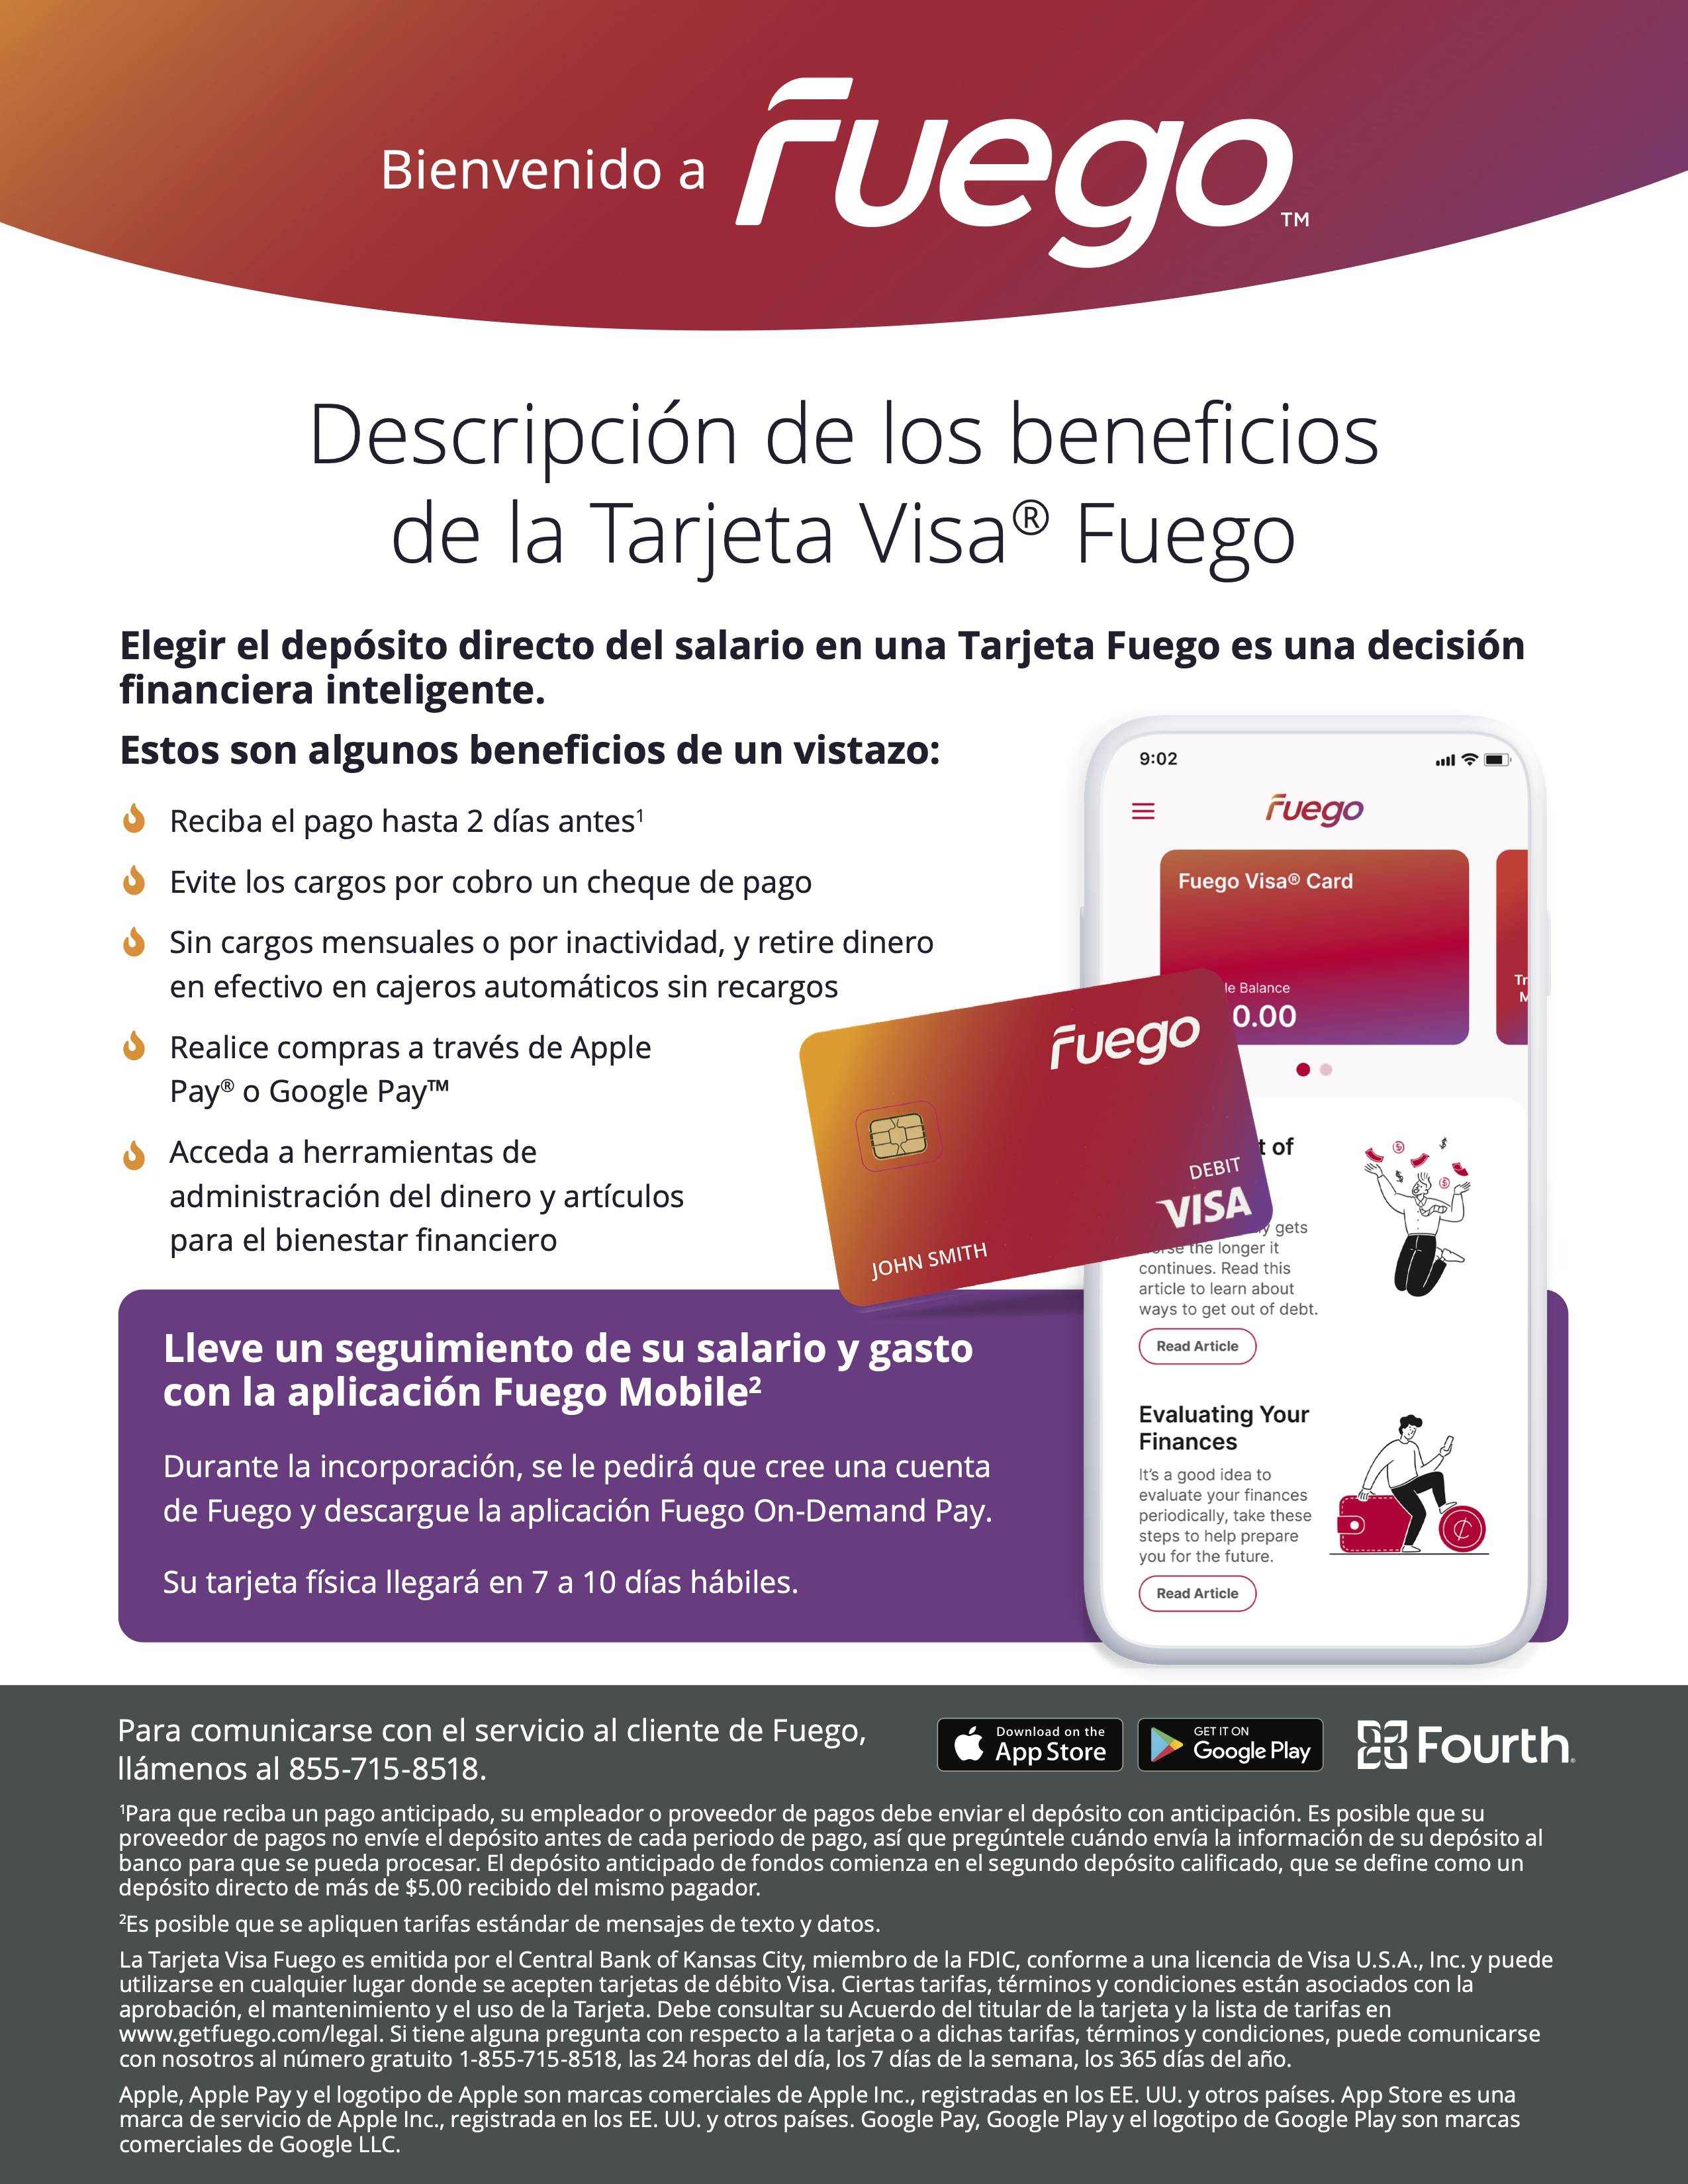 Fuego Employee Flyer_Understand the benefits of the Fuego Visa Card (Spanish) (1).png